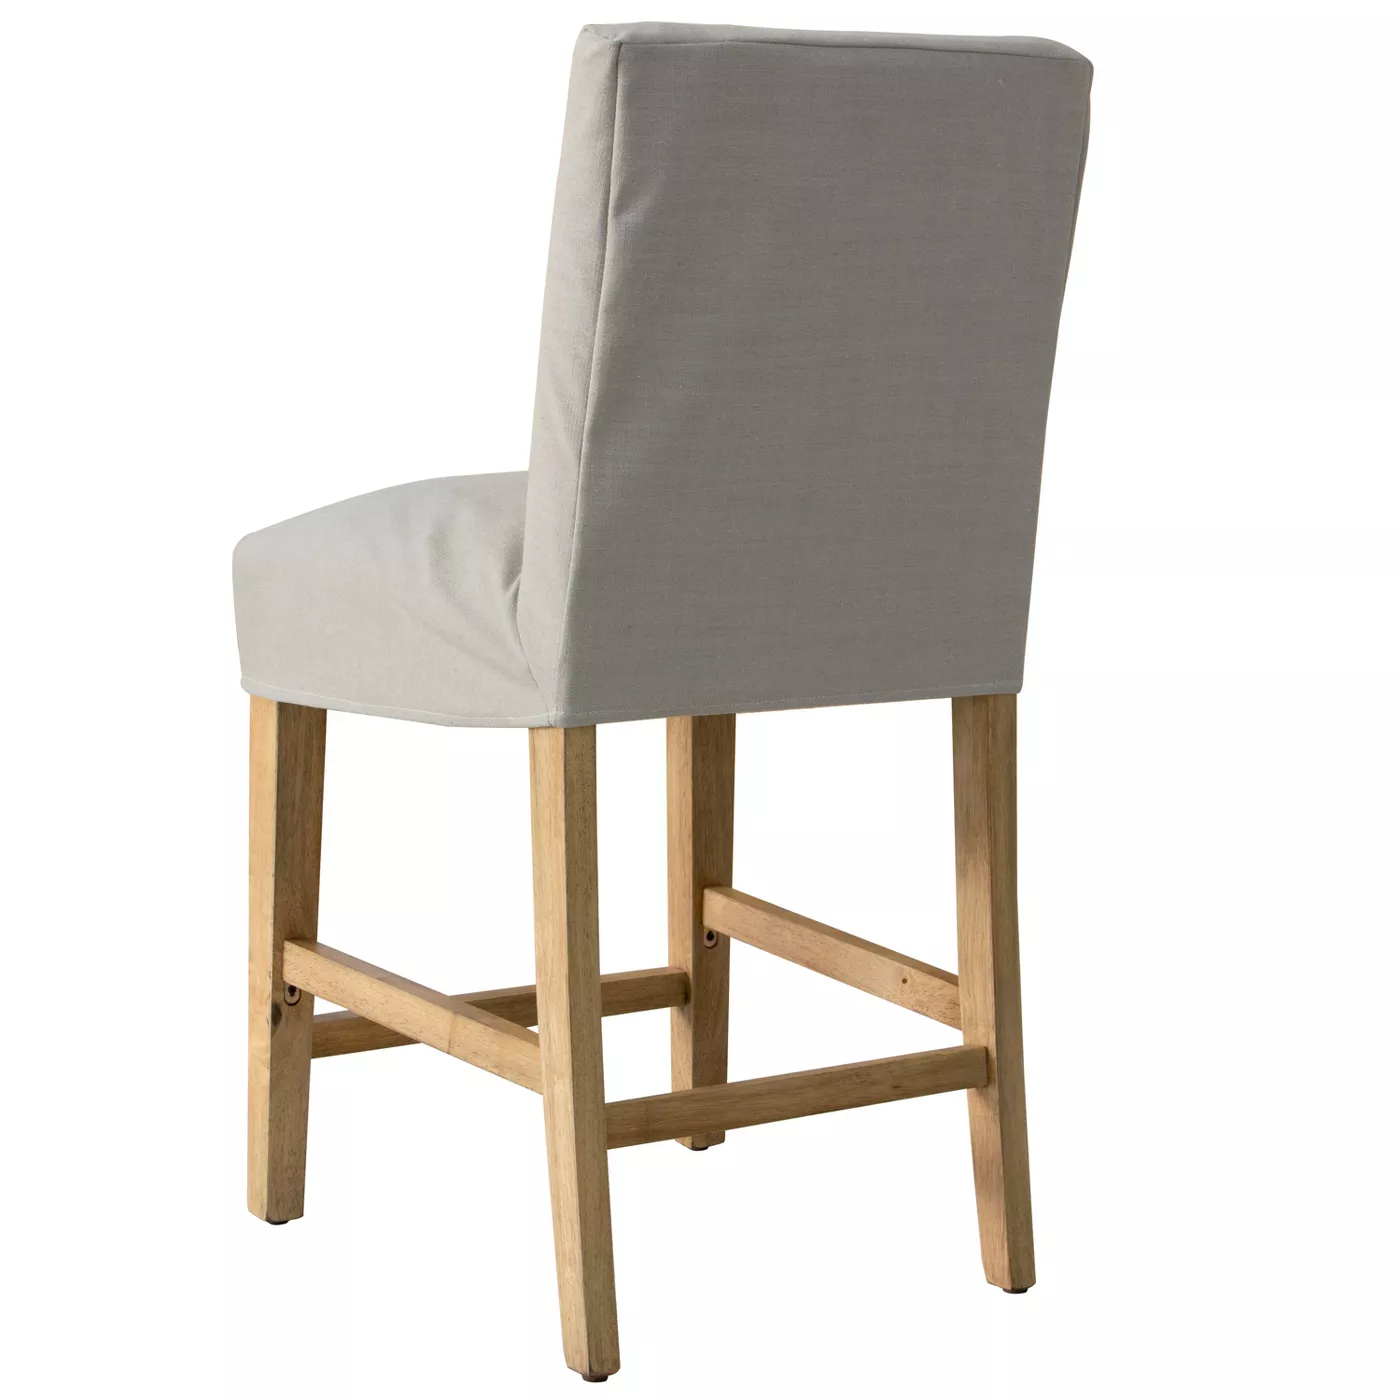 Slipcover Counter Stool. When You Need the Perfect Linen Slipcovered Chairs & Linen Upholstered Seating...certainly a lovely collection of options indeed.